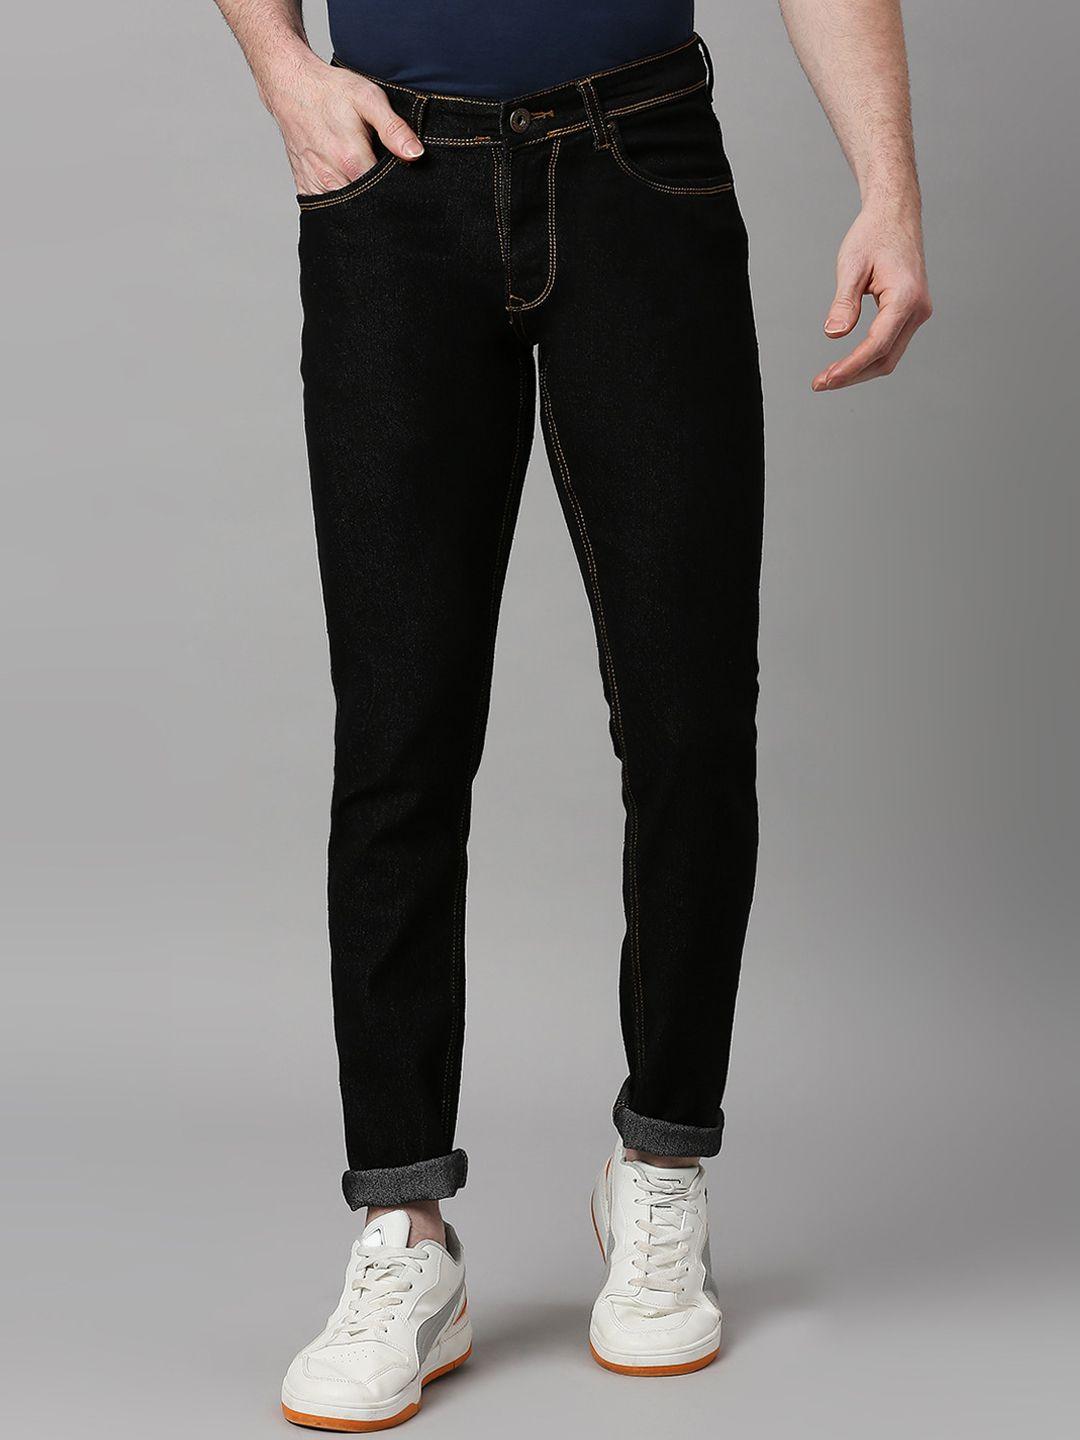 hj hasasi men slim fit stretchable jeans